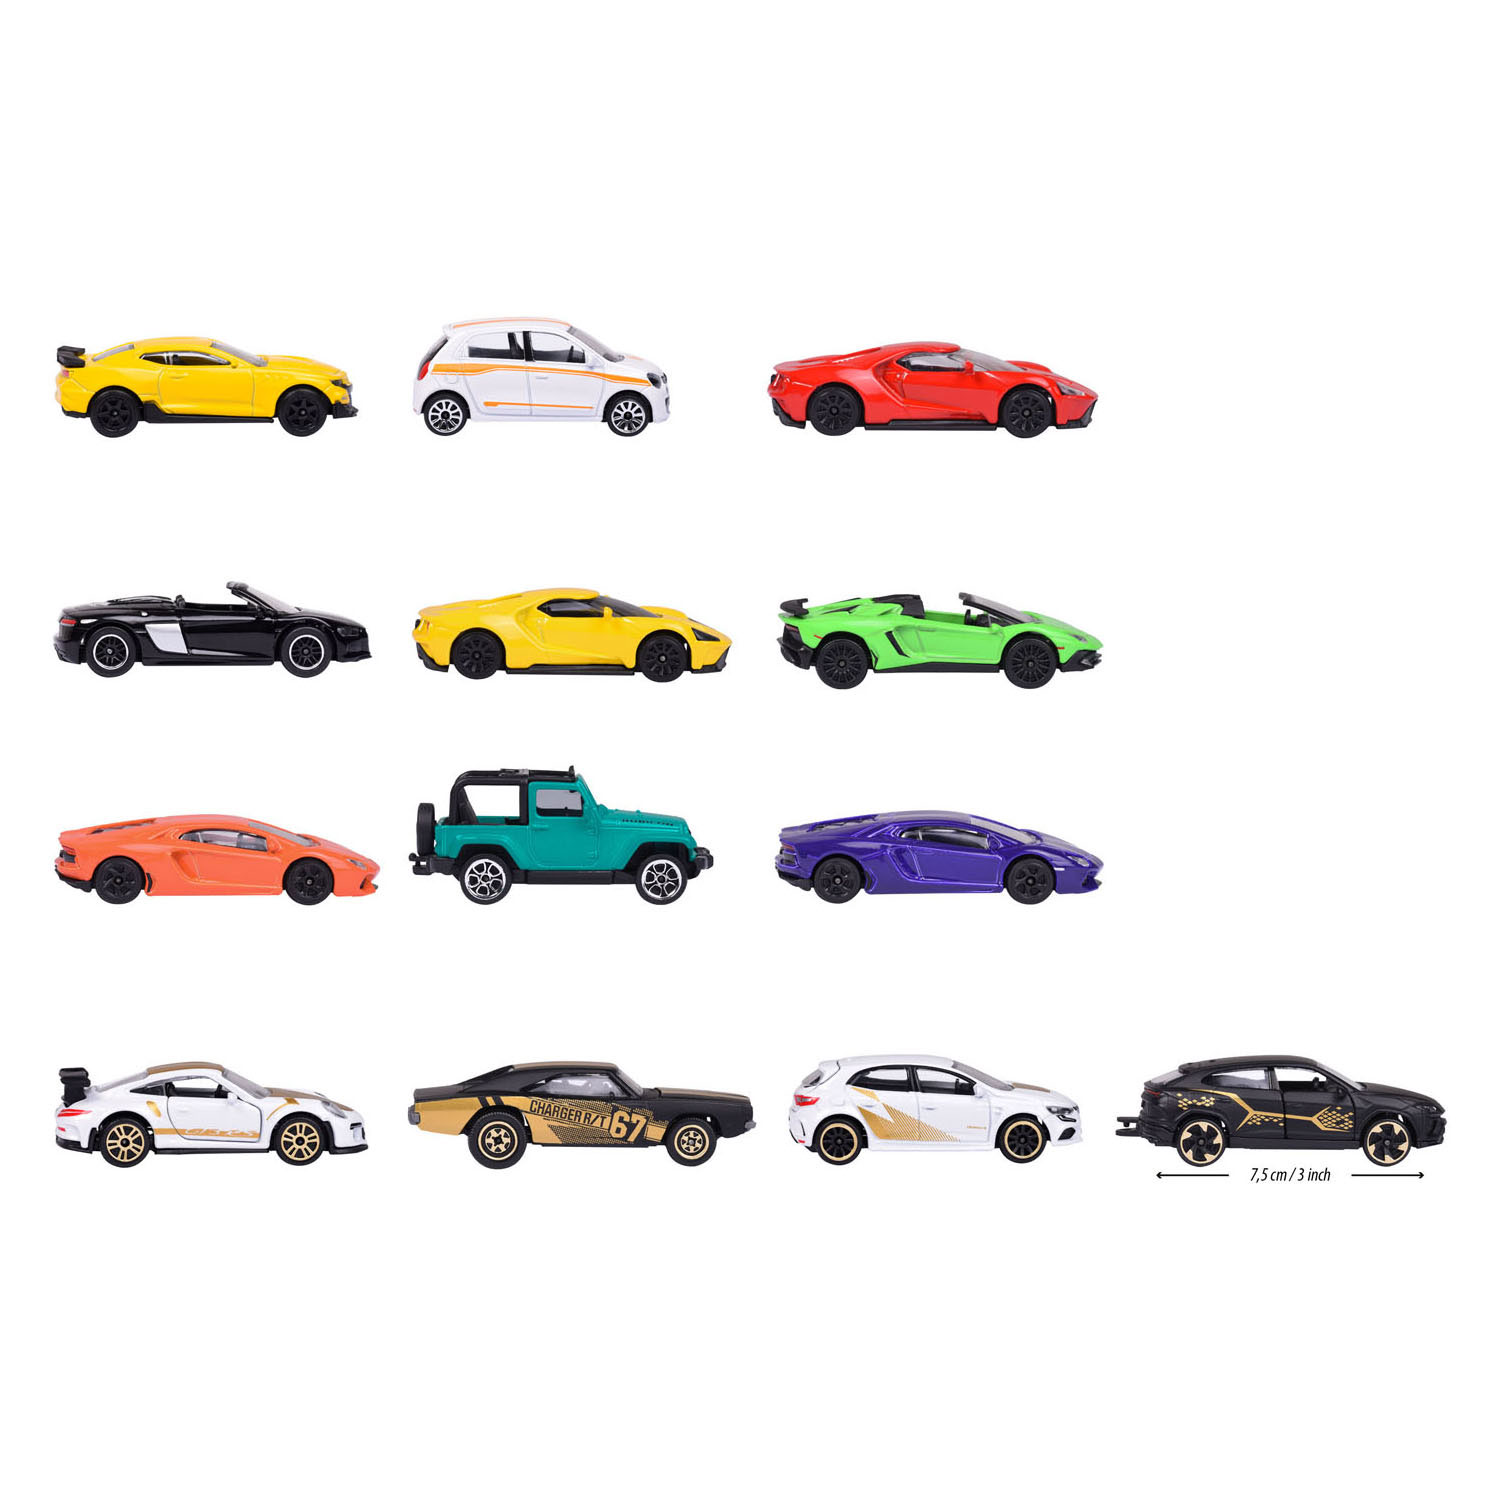 Majorette Limited Edition 9 Speelauto's Giftpack, 13st.